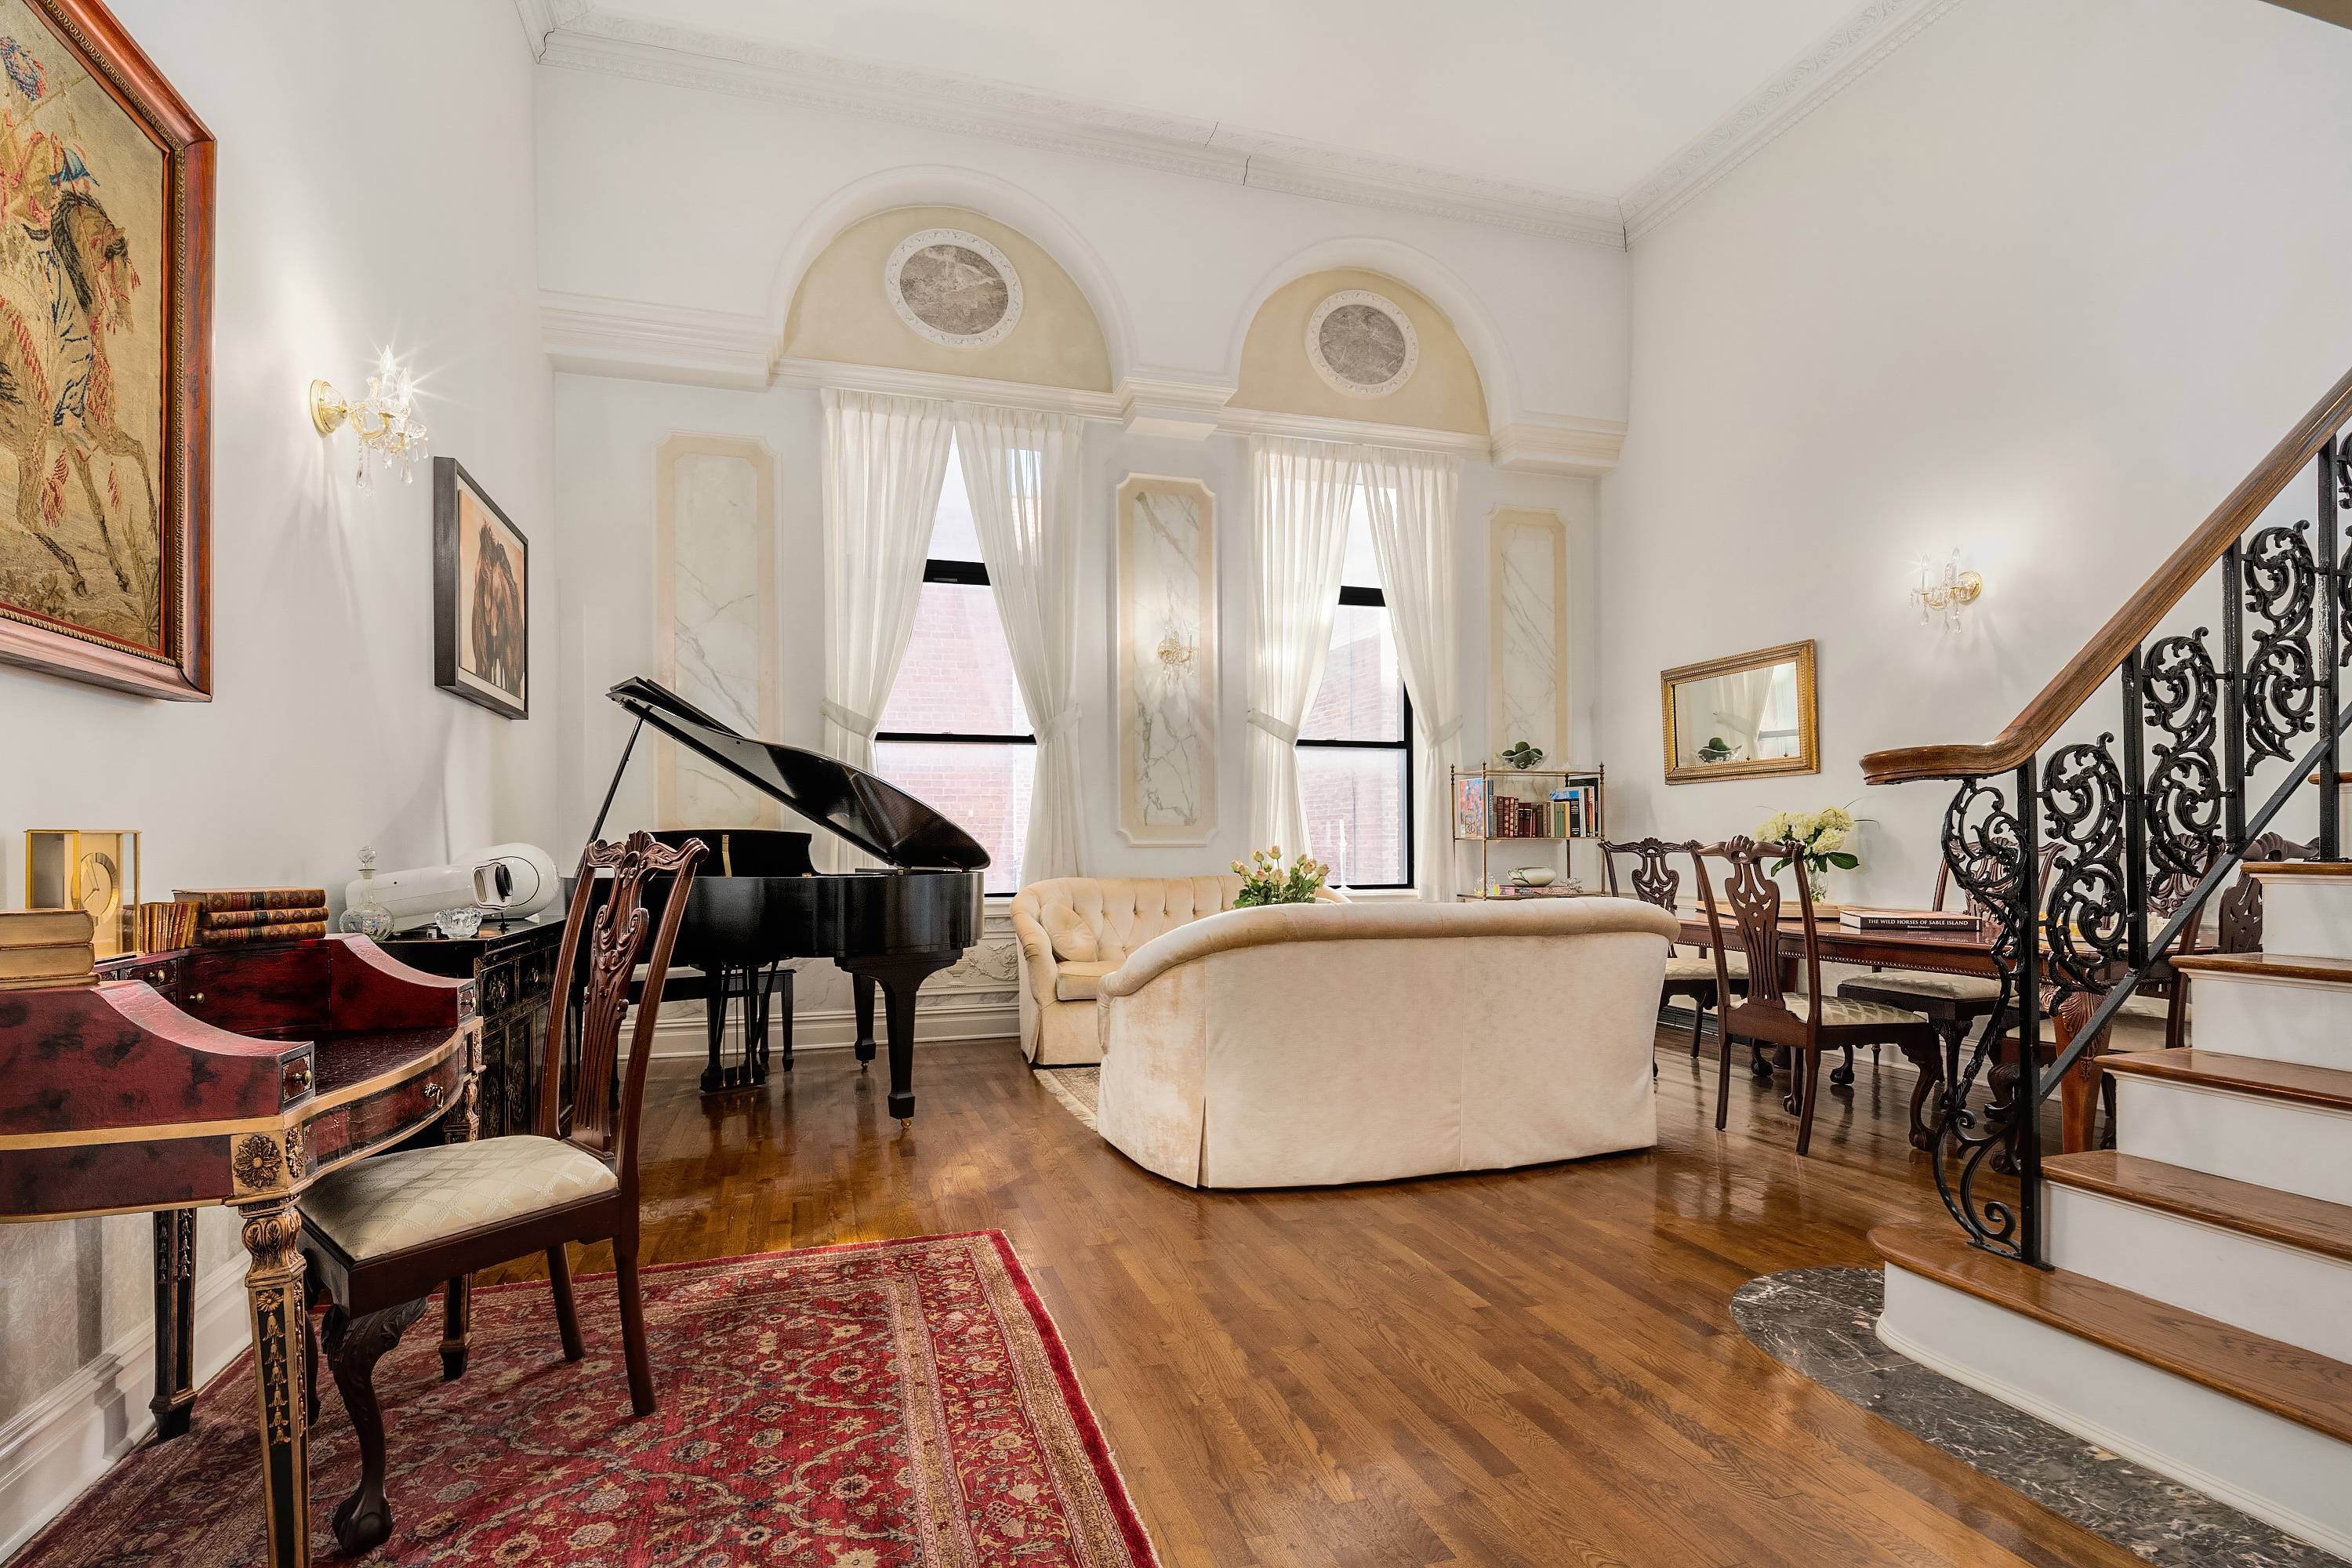 This elegant and striking one bedroom, one and a half bath residence boasts old world European charm with soaring 16 foot ceilings and arched details in one of Manhattan s ...